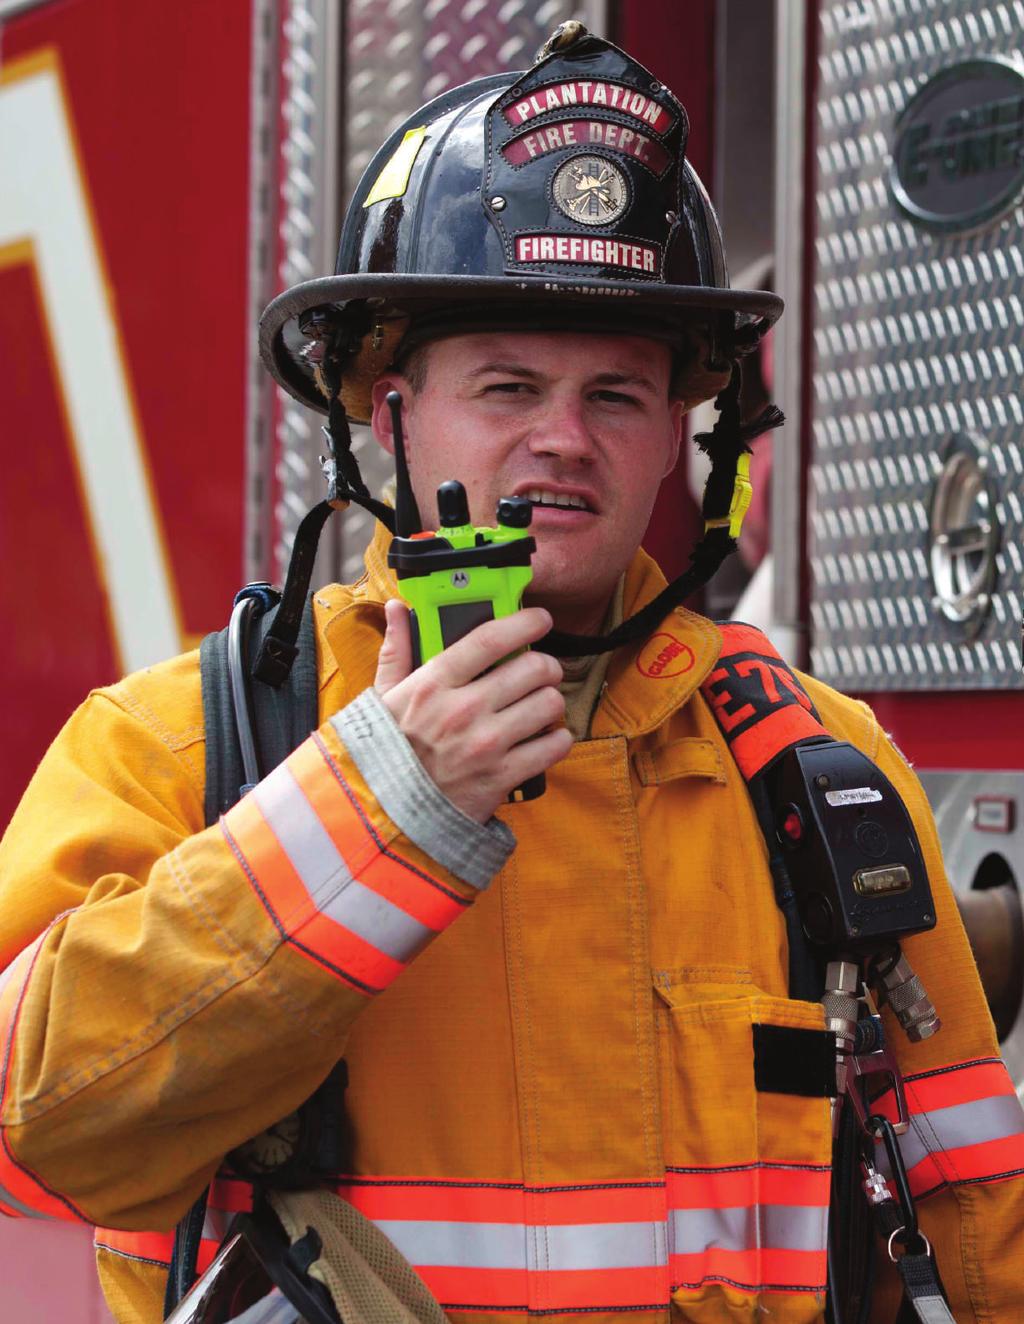 THE MOST COMPLETE LINEUP OF TWO-WAY RADIOS DESIGNED TO KEEP YOU SAFE Agencies expect their investment to deliver maximum